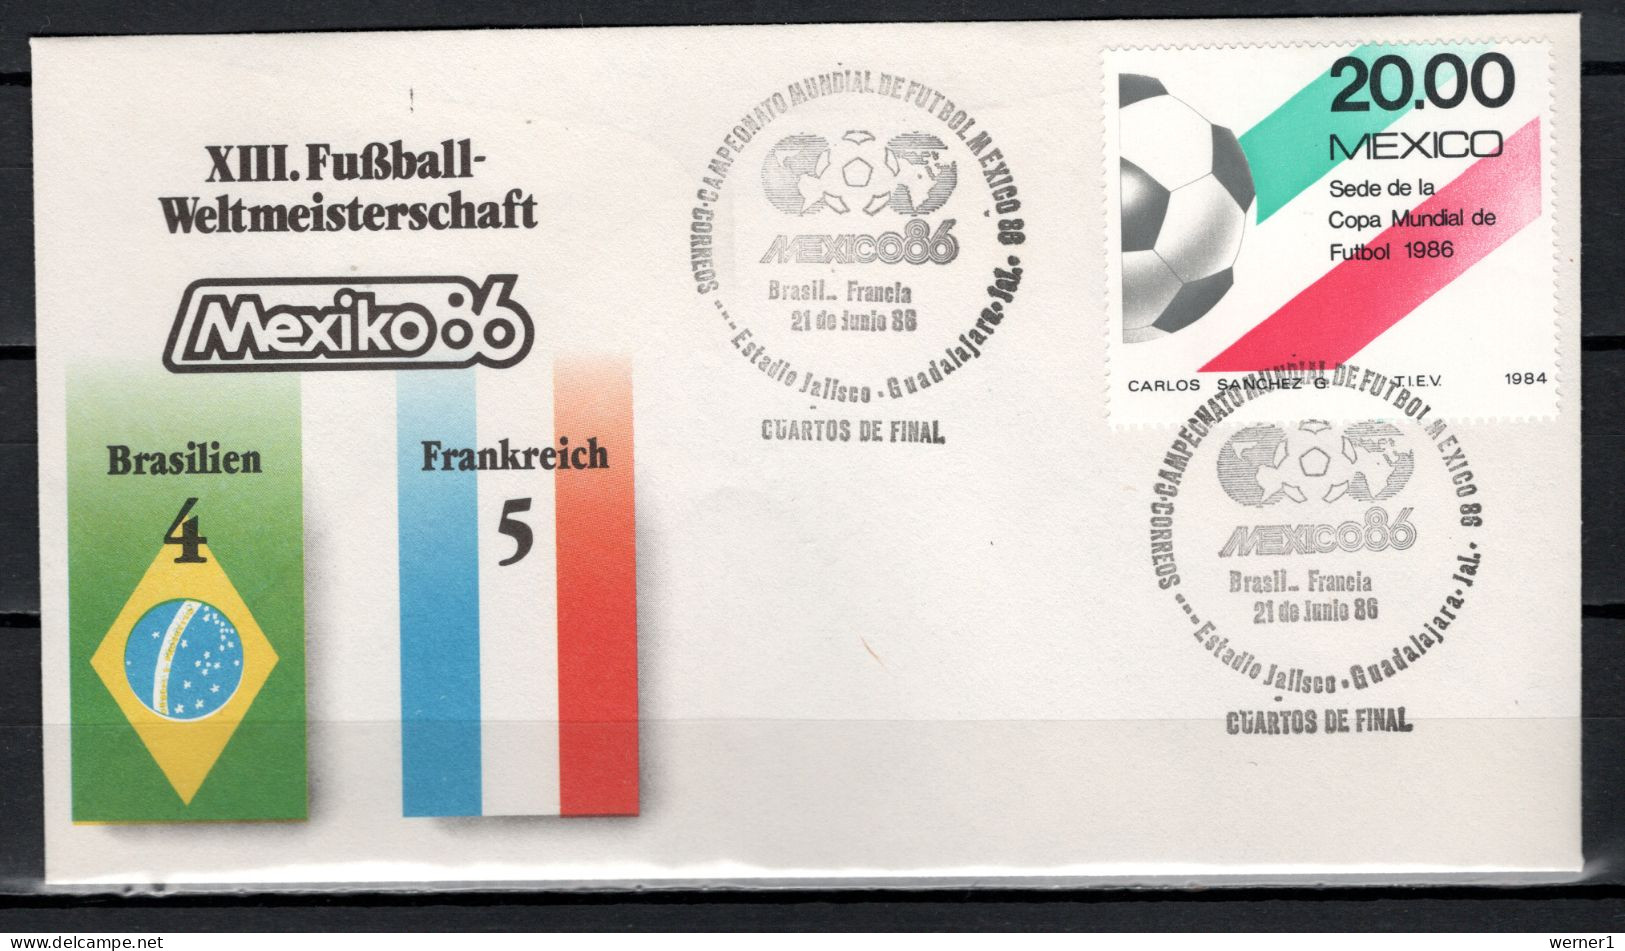 Mexico 1986 Football Soccer World Cup Commemorative Cover Match Brazil - France 4 : 5 - 1986 – Mexiko